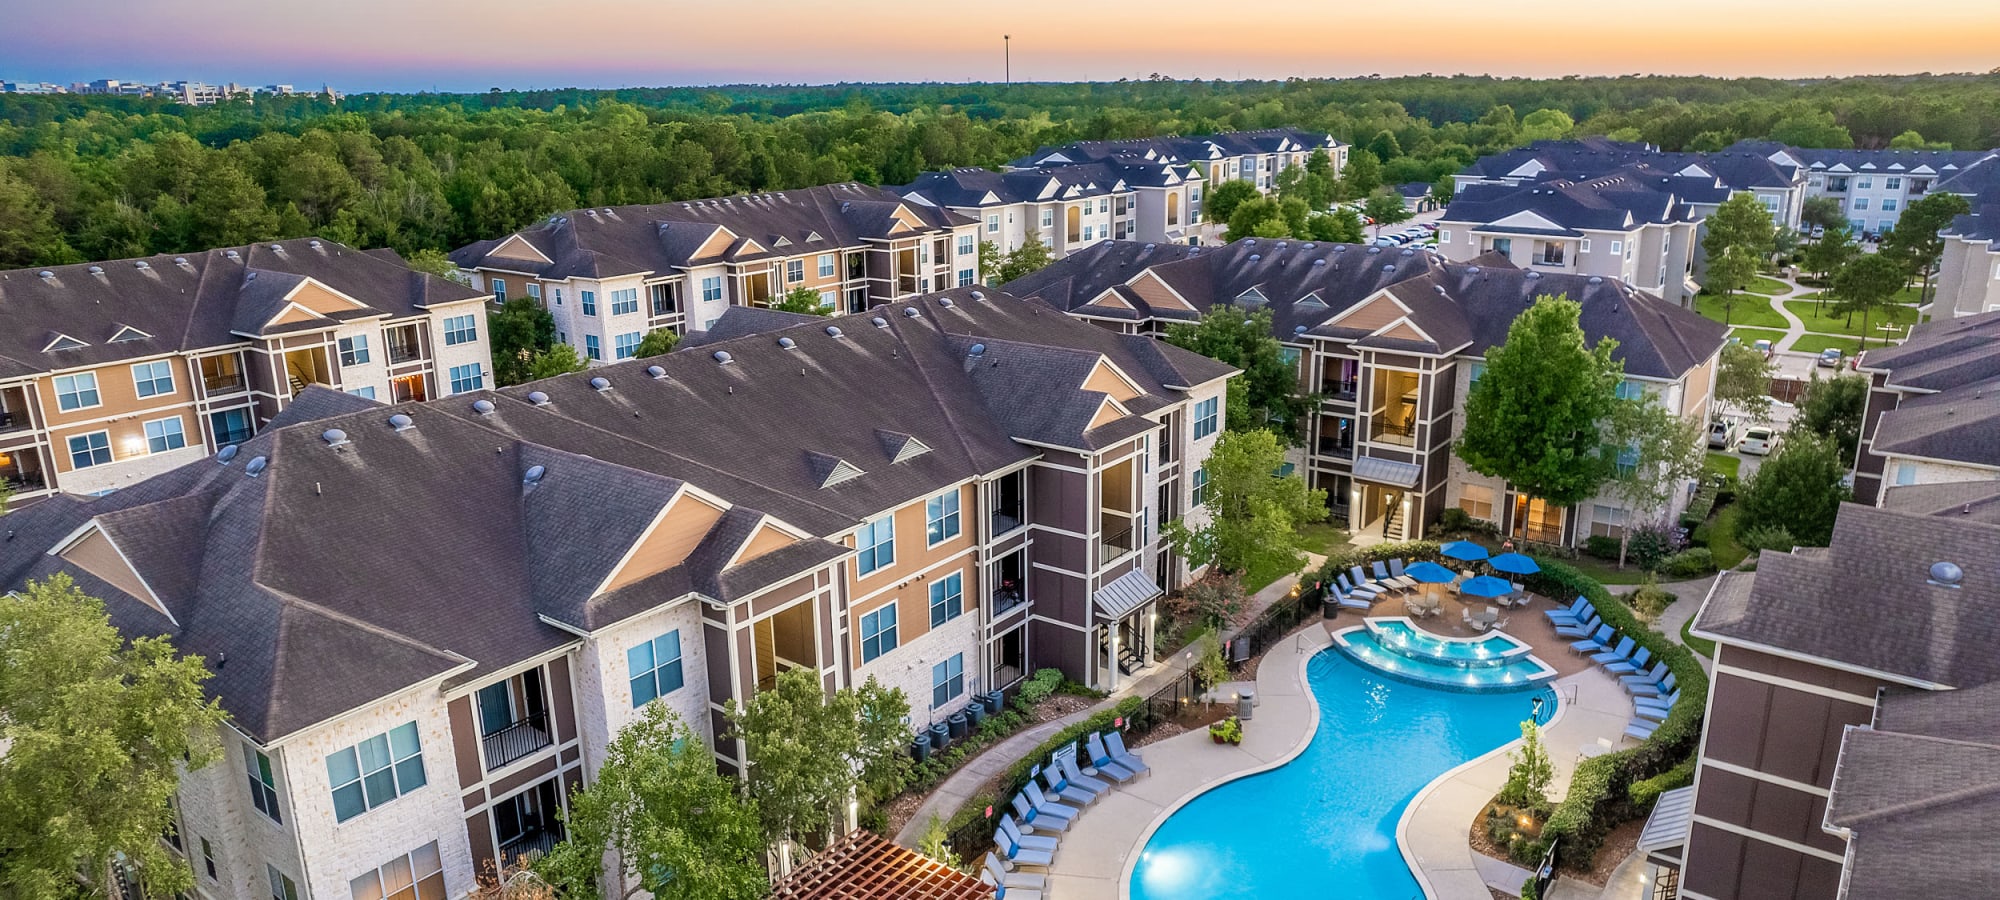 Gallery of photos for Marquis at The Woodlands in Spring, Texas